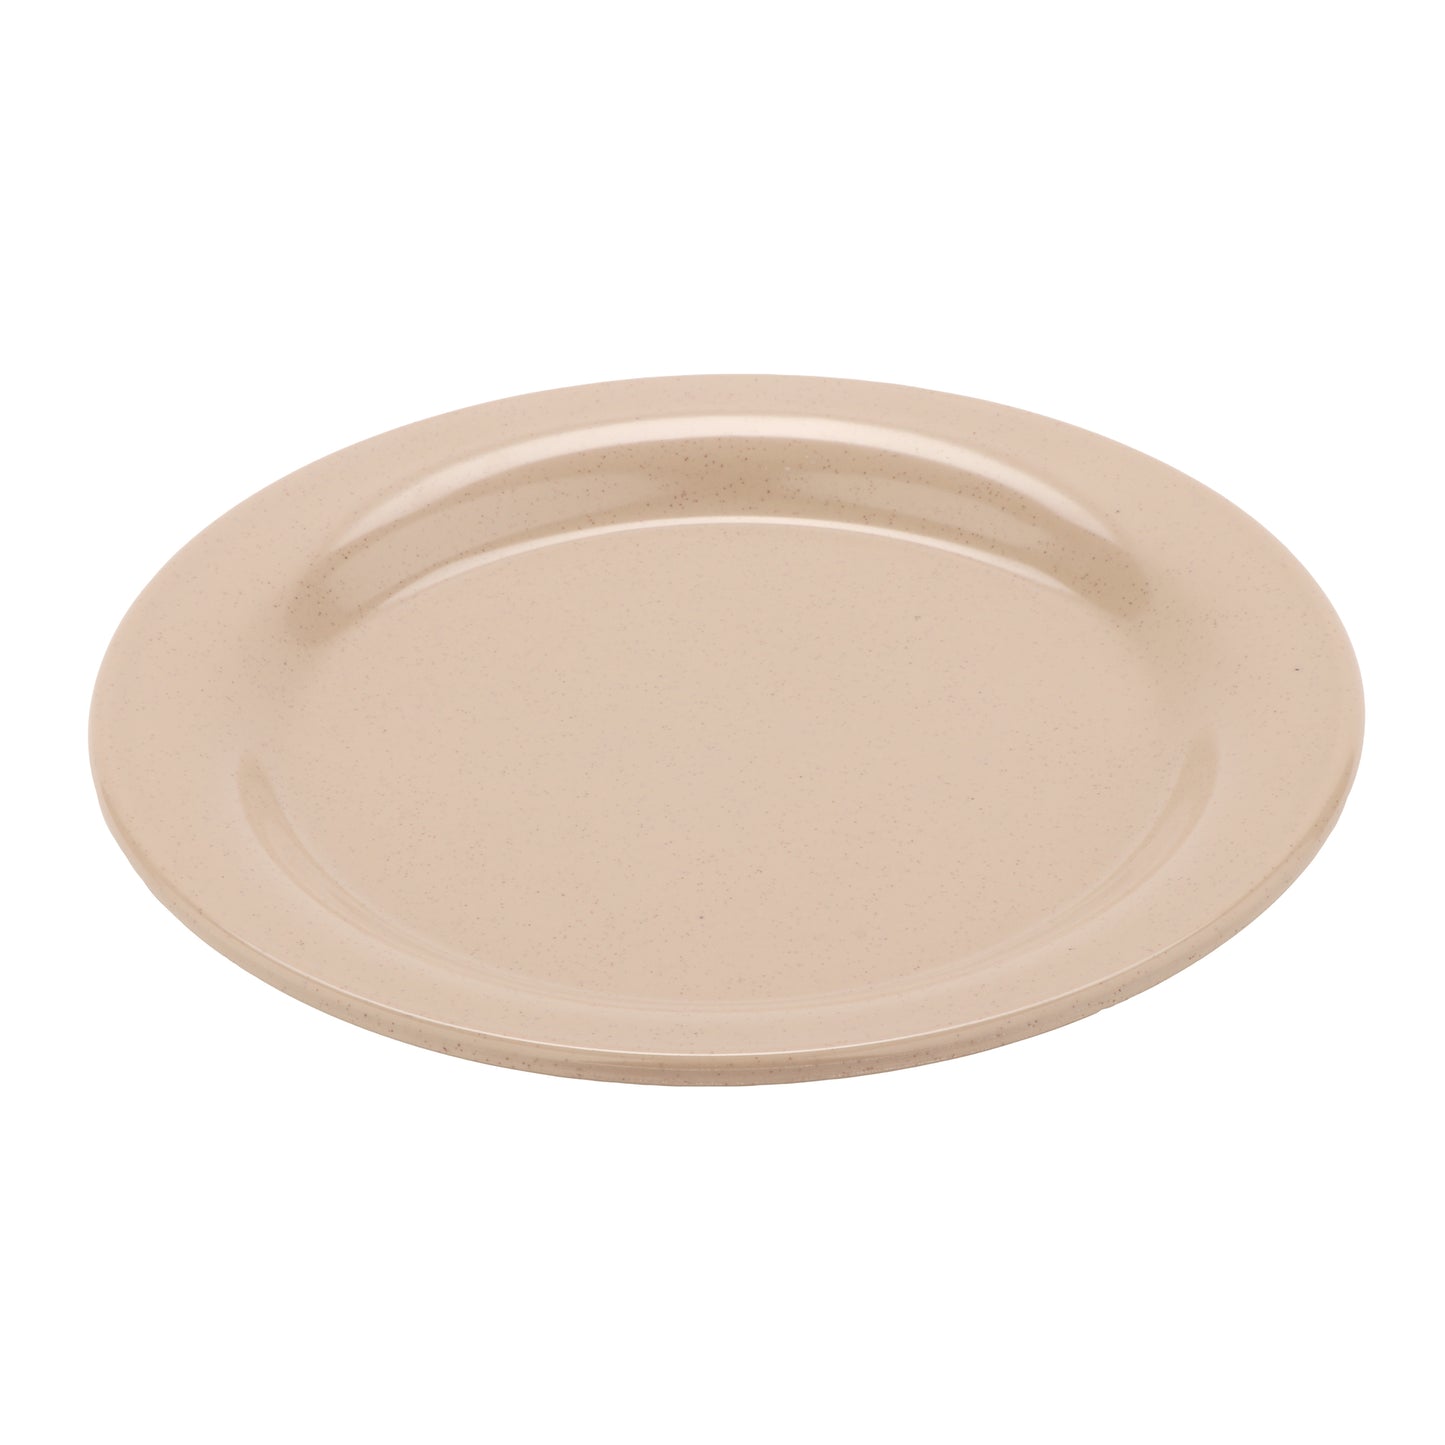 9" Round Plate (12 Pack)